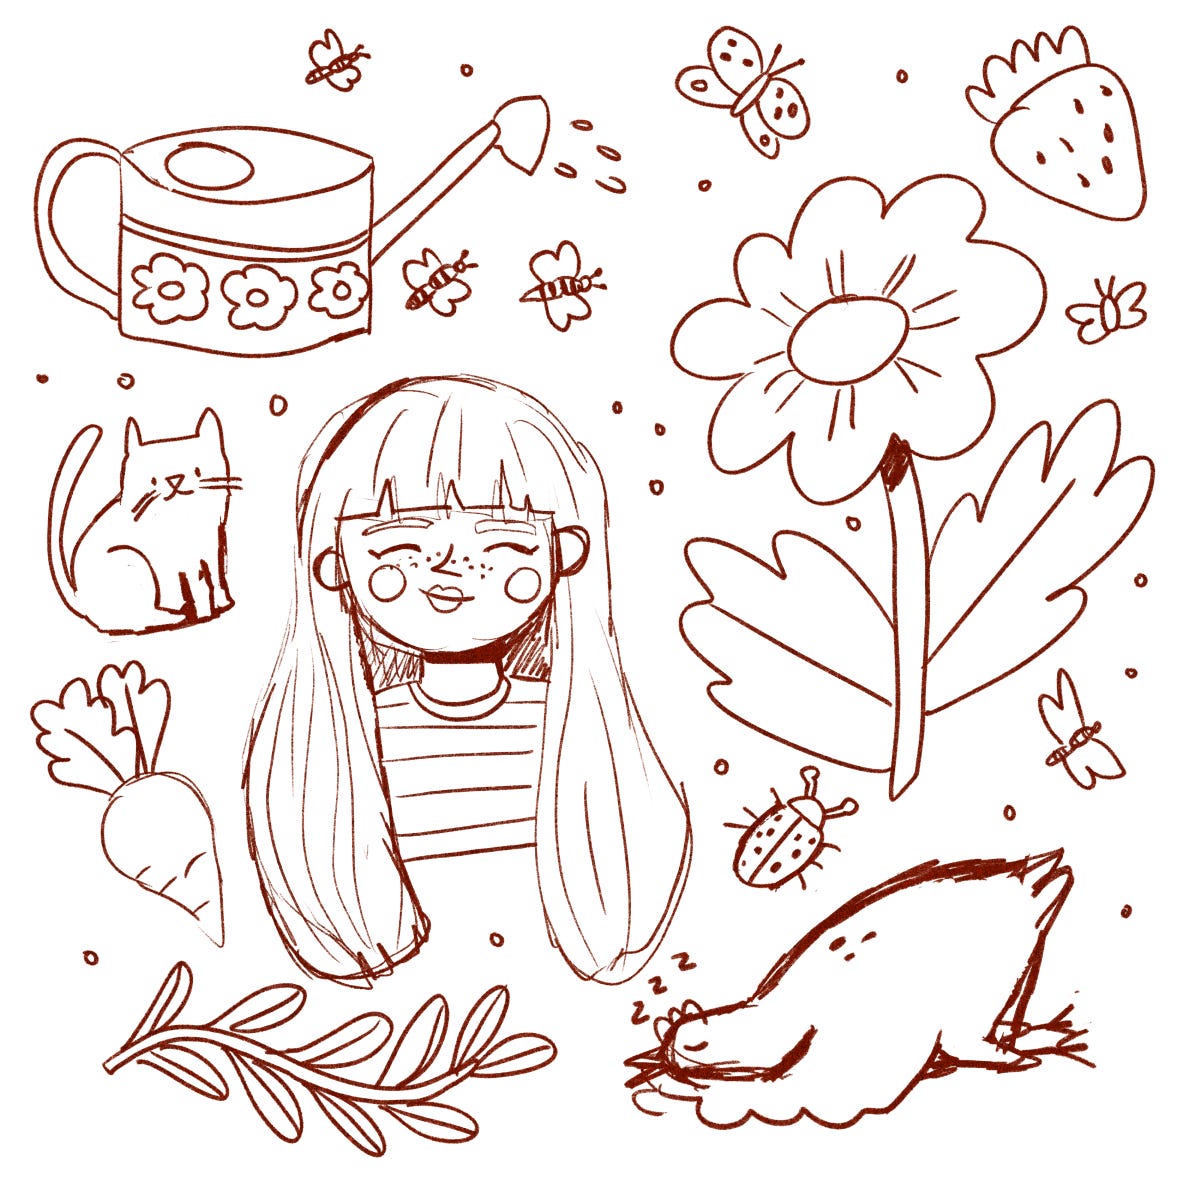 A digital sketch of a collection of things: flowers, bees, a watering can, a girl character, a cat, a sleeping chicken, a beet and more.